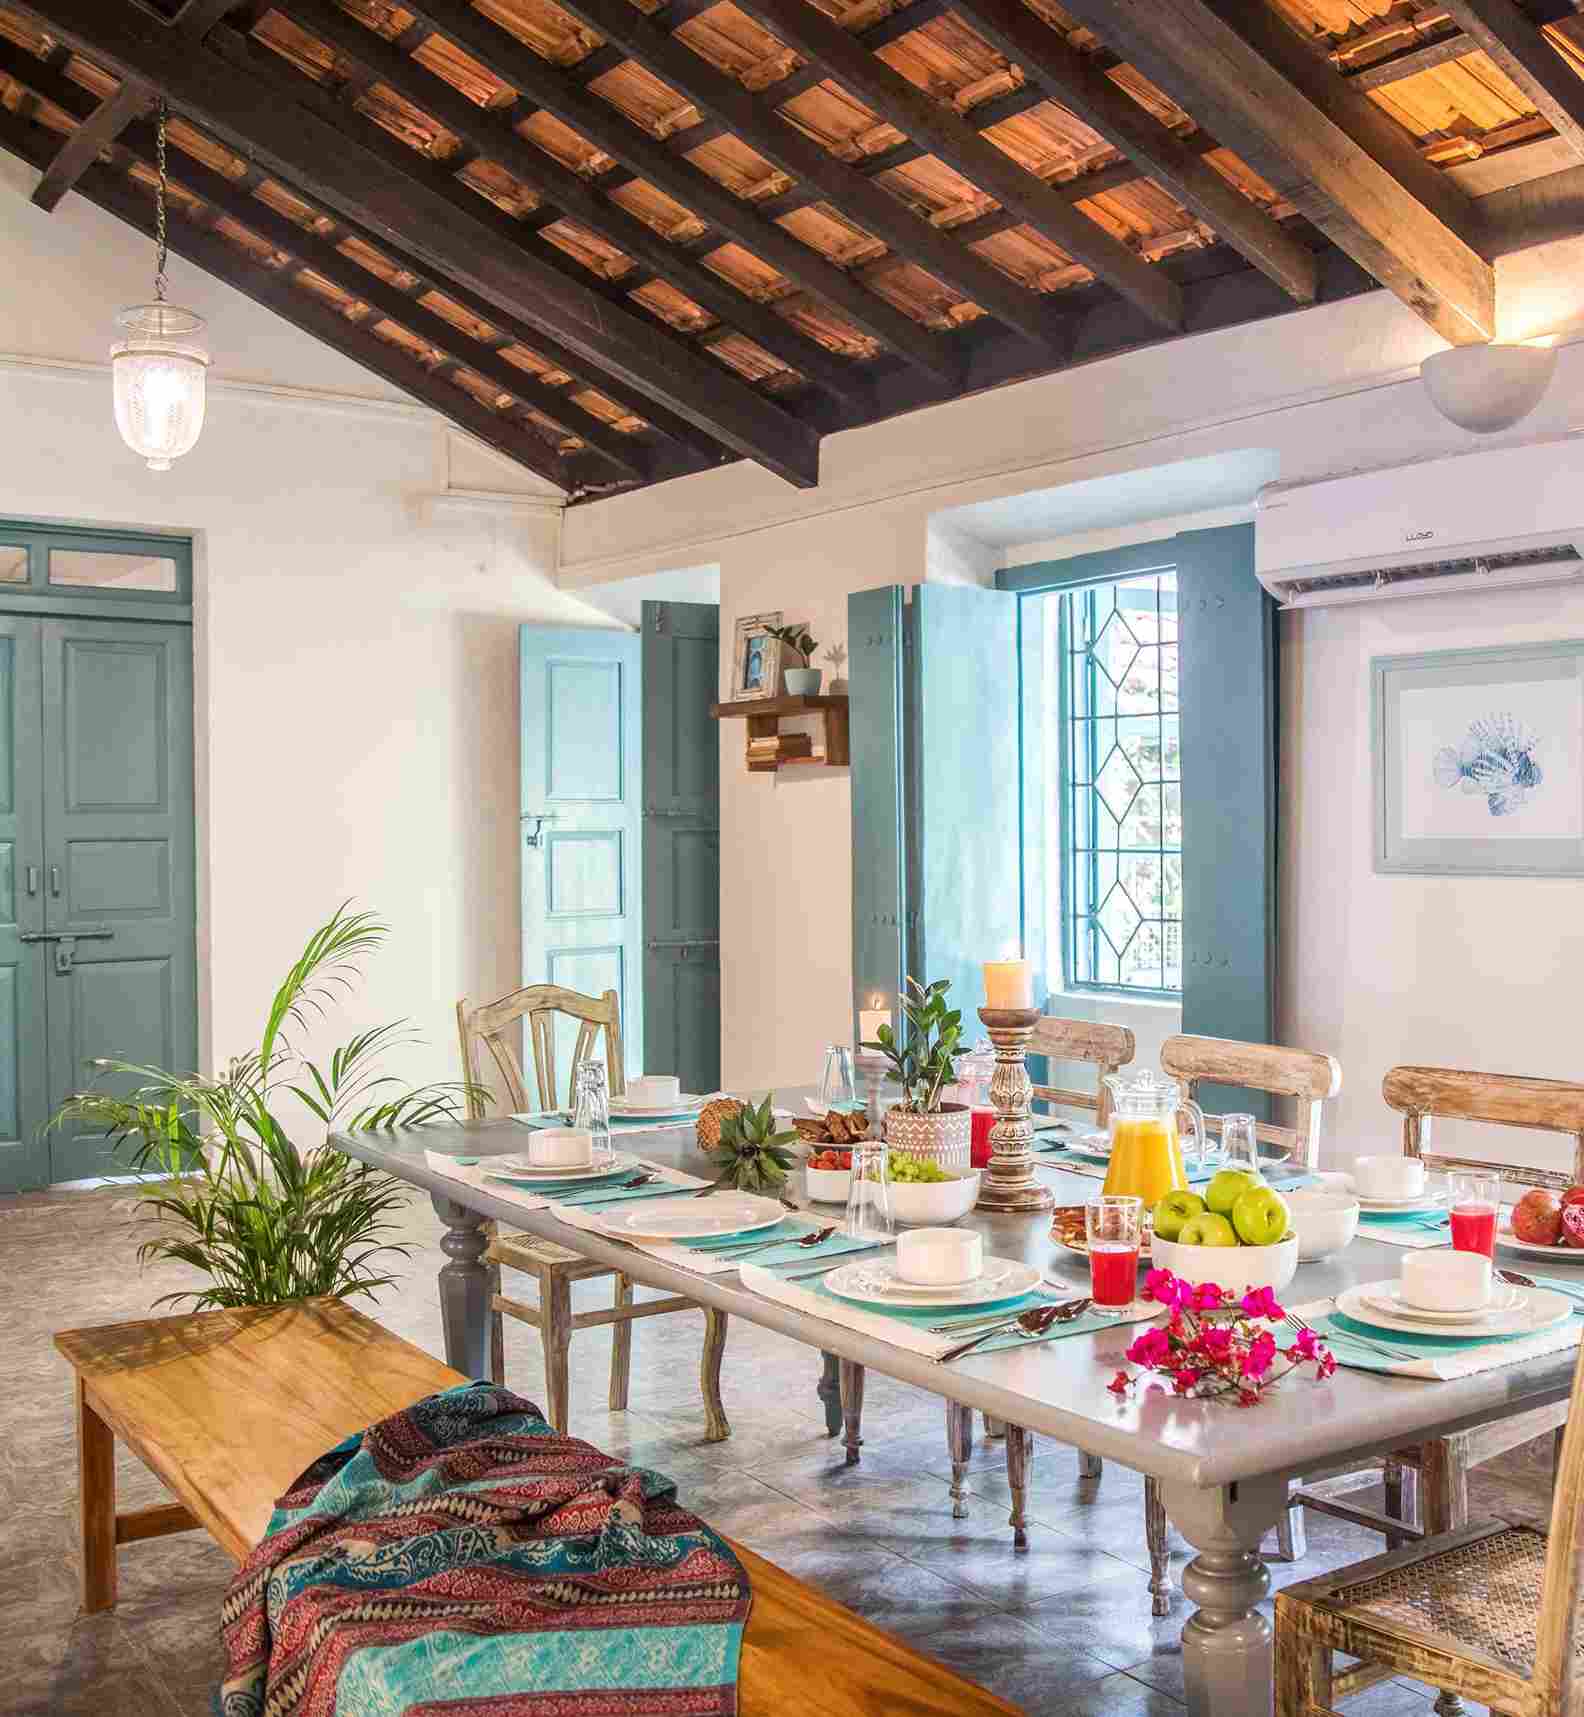 Villa Saudade in Arpora, Goa is a heritage home that has been converted into a homestay